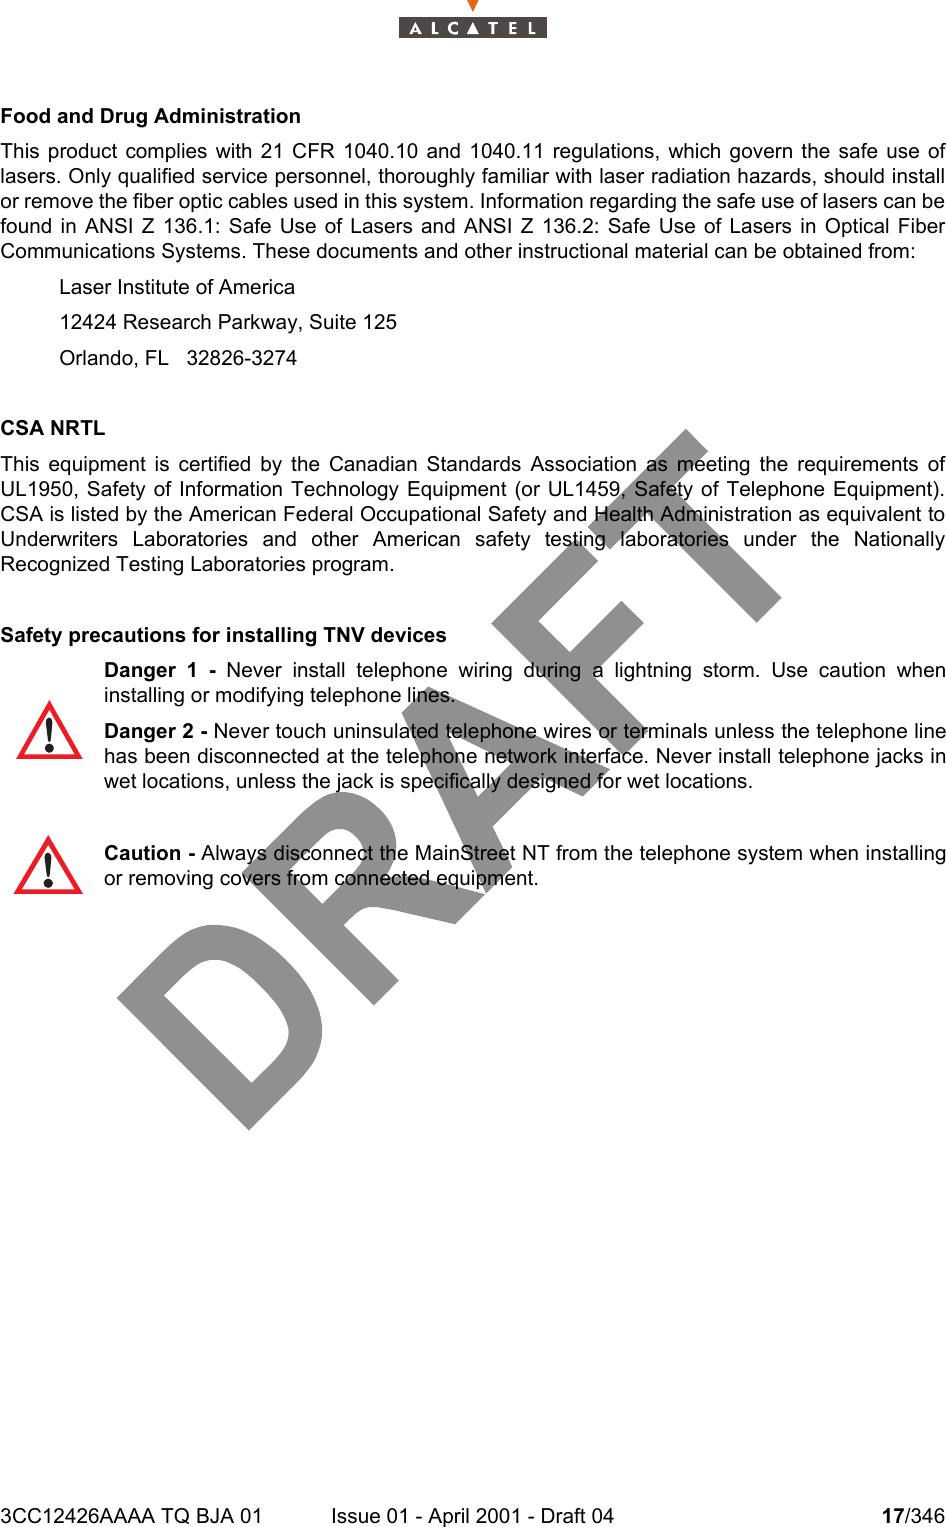 3CC12426AAAA TQ BJA 01 Issue 01 - April 2001 - Draft 04 17/34618Food and Drug Administration This product complies with 21 CFR 1040.10 and 1040.11 regulations, which govern the safe use oflasers. Only qualified service personnel, thoroughly familiar with laser radiation hazards, should installor remove the fiber optic cables used in this system. Information regarding the safe use of lasers can befound in ANSI Z 136.1: Safe Use of Lasers and ANSI Z 136.2: Safe Use of Lasers in Optical FiberCommunications Systems. These documents and other instructional material can be obtained from:Laser Institute of America12424 Research Parkway, Suite 125Orlando, FL   32826-3274 CSA NRTLThis equipment is certified by the Canadian Standards Association as meeting the requirements ofUL1950, Safety of Information Technology Equipment (or UL1459, Safety of Telephone Equipment).CSA is listed by the American Federal Occupational Safety and Health Administration as equivalent toUnderwriters Laboratories and other American safety testing laboratories under the NationallyRecognized Testing Laboratories program.Safety precautions for installing TNV devicesDanger 1 - Never install telephone wiring during a lightning storm. Use caution wheninstalling or modifying telephone lines. Danger 2 - Never touch uninsulated telephone wires or terminals unless the telephone linehas been disconnected at the telephone network interface. Never install telephone jacks inwet locations, unless the jack is specifically designed for wet locations.Caution - Always disconnect the MainStreet NT from the telephone system when installingor removing covers from connected equipment.